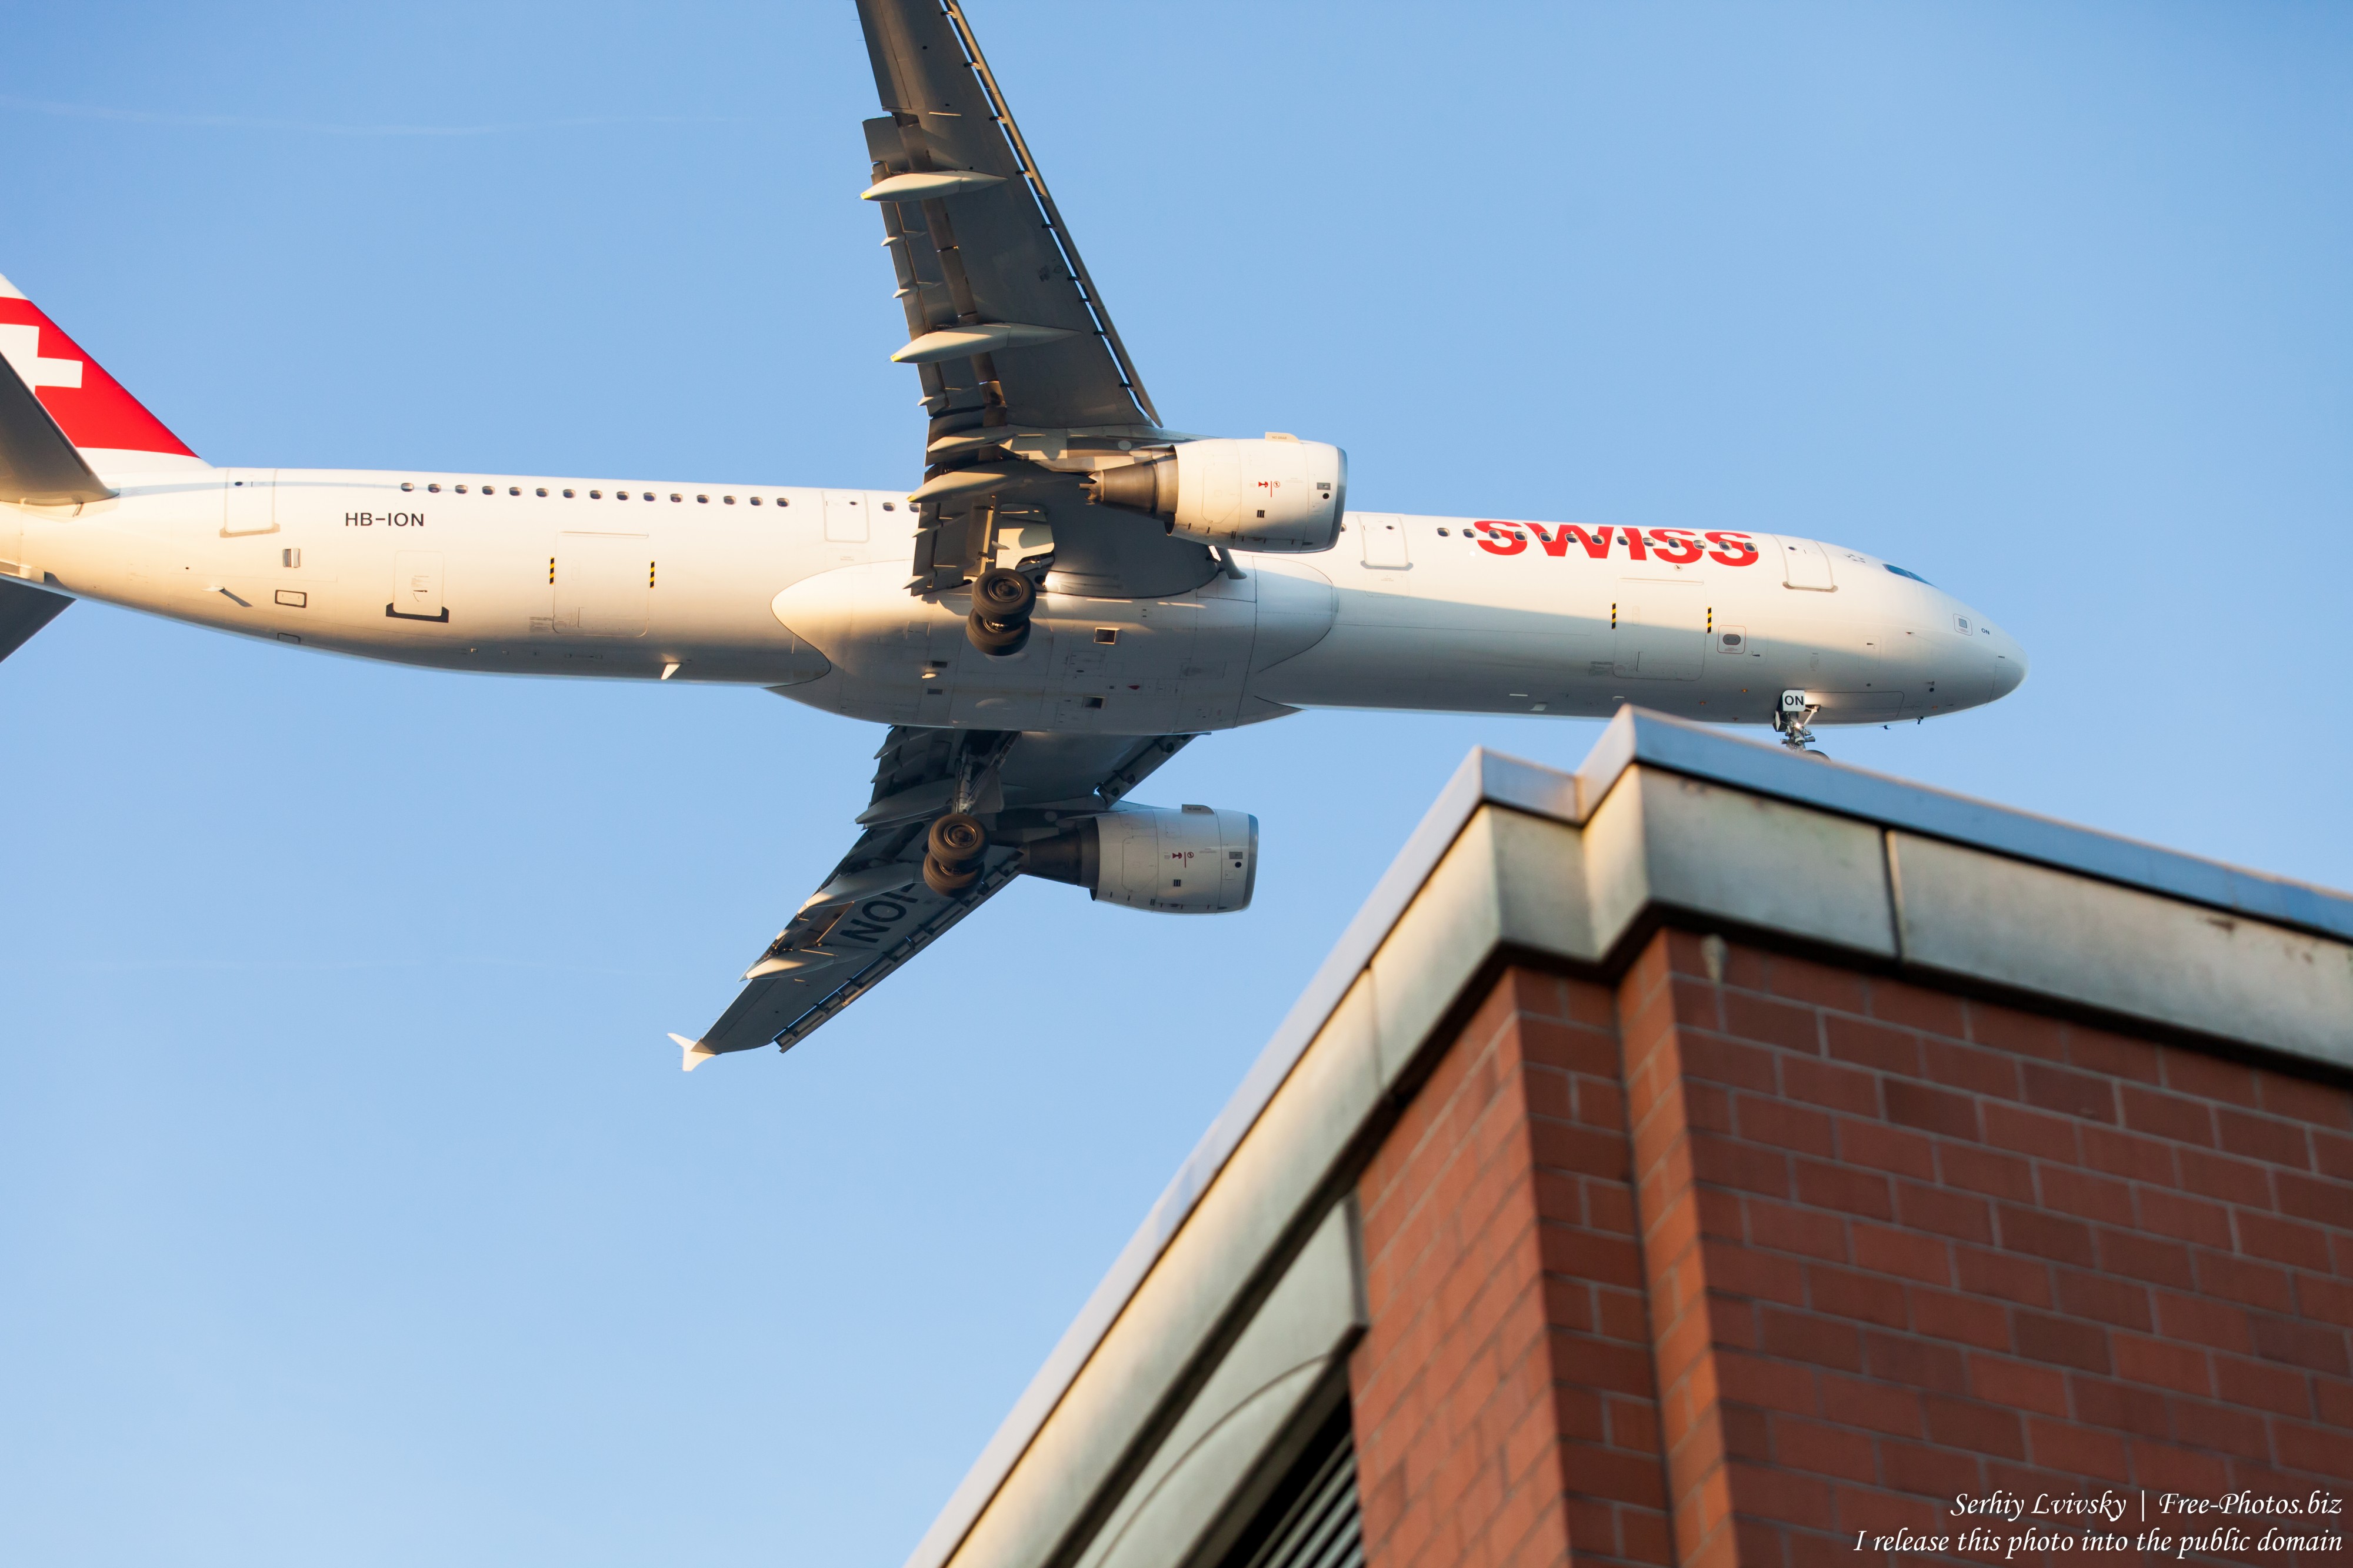 a Swiss Air Lines airplane near Zurich airport in December 2015 photographed by Serhiy Lvivsky, picture 13